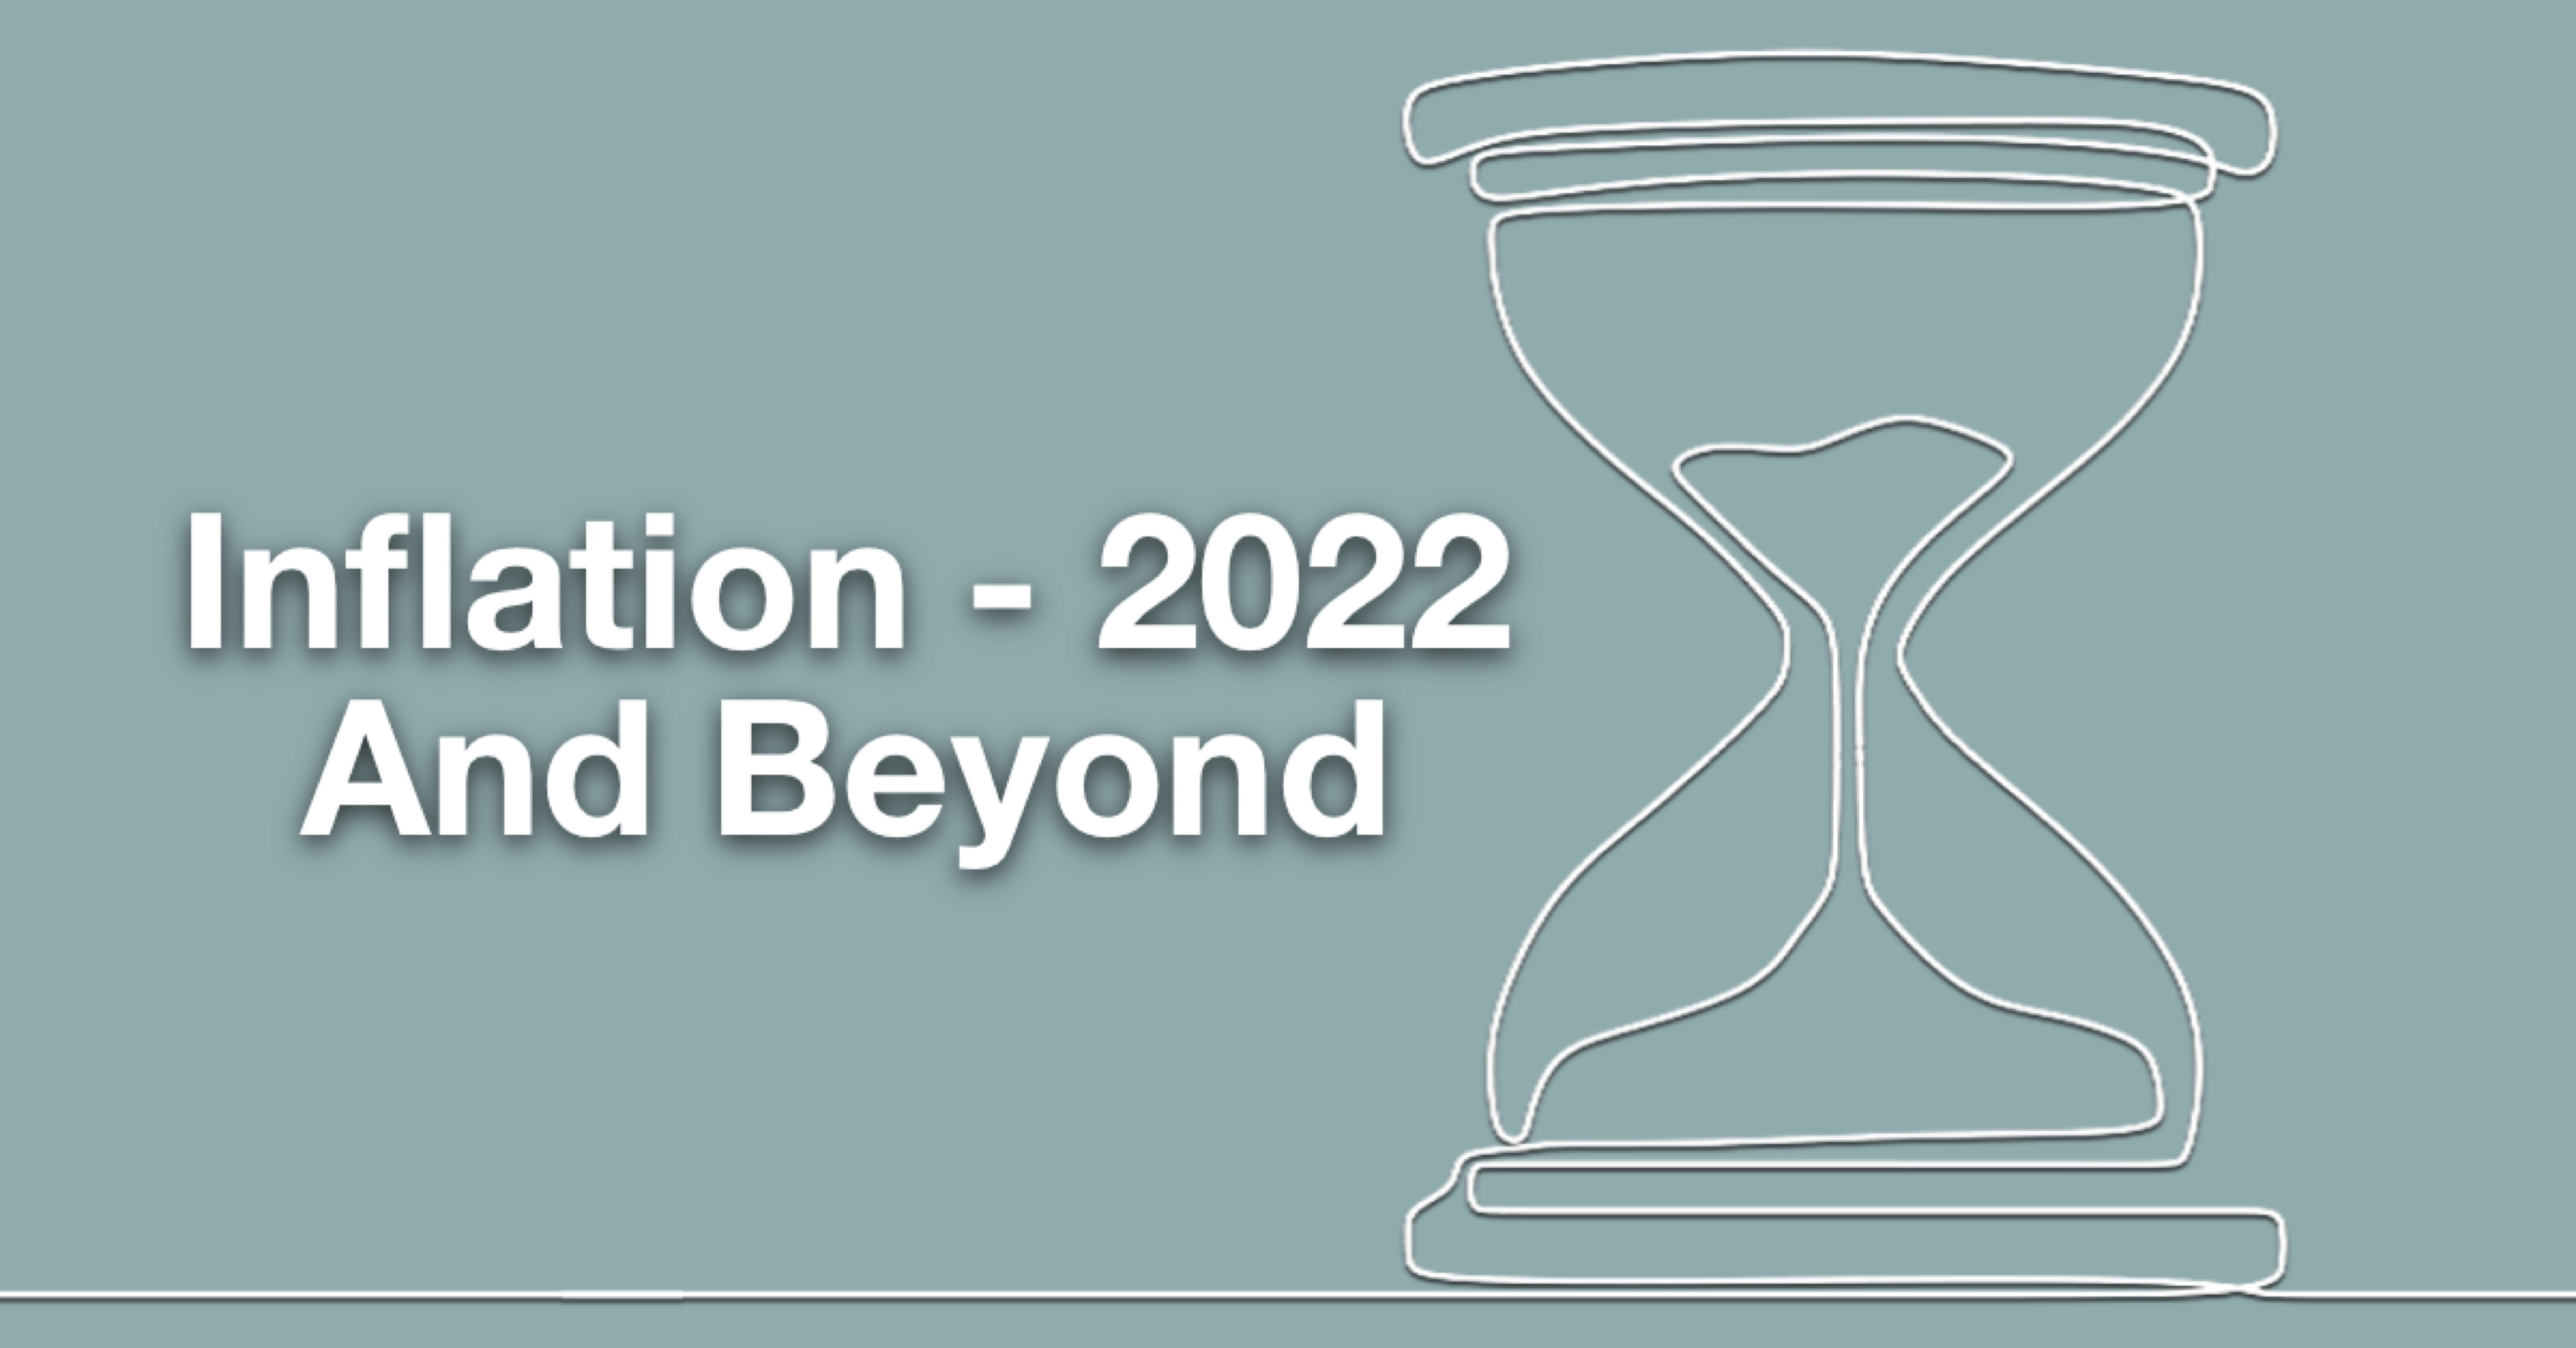 Inflation – 2022 And Beyond